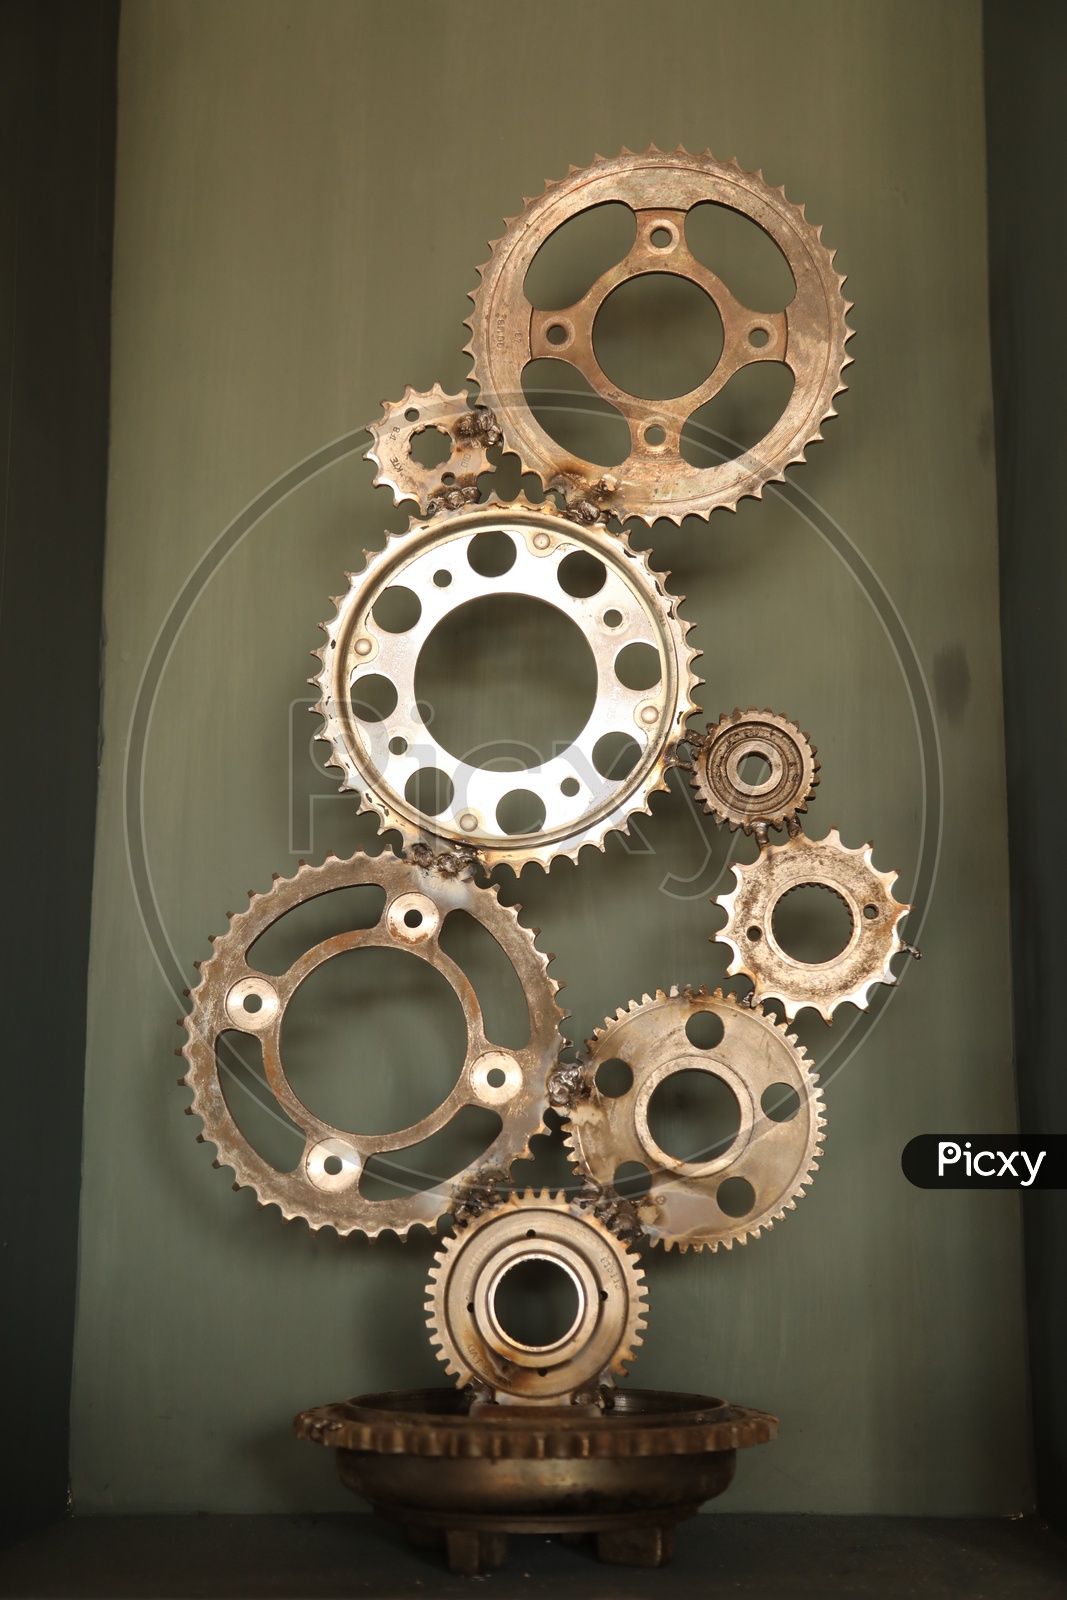 Interior Design Of a Room With Gear Wheels